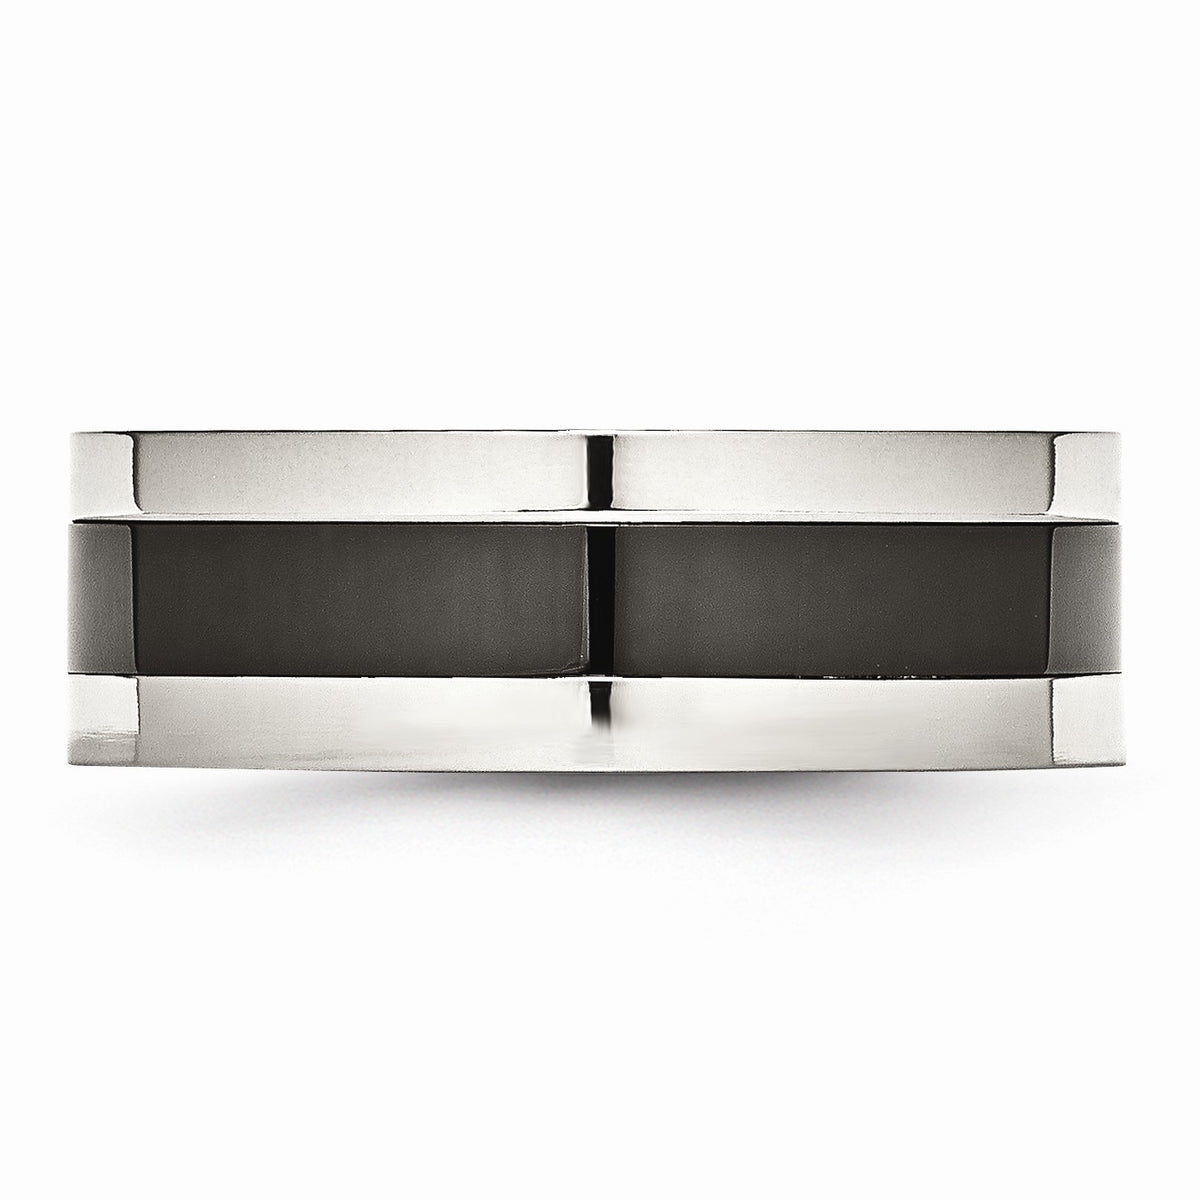 Alternate view of the 8mm Polished Stainless Steel and Black Ceramic Flat Band by The Black Bow Jewelry Co.